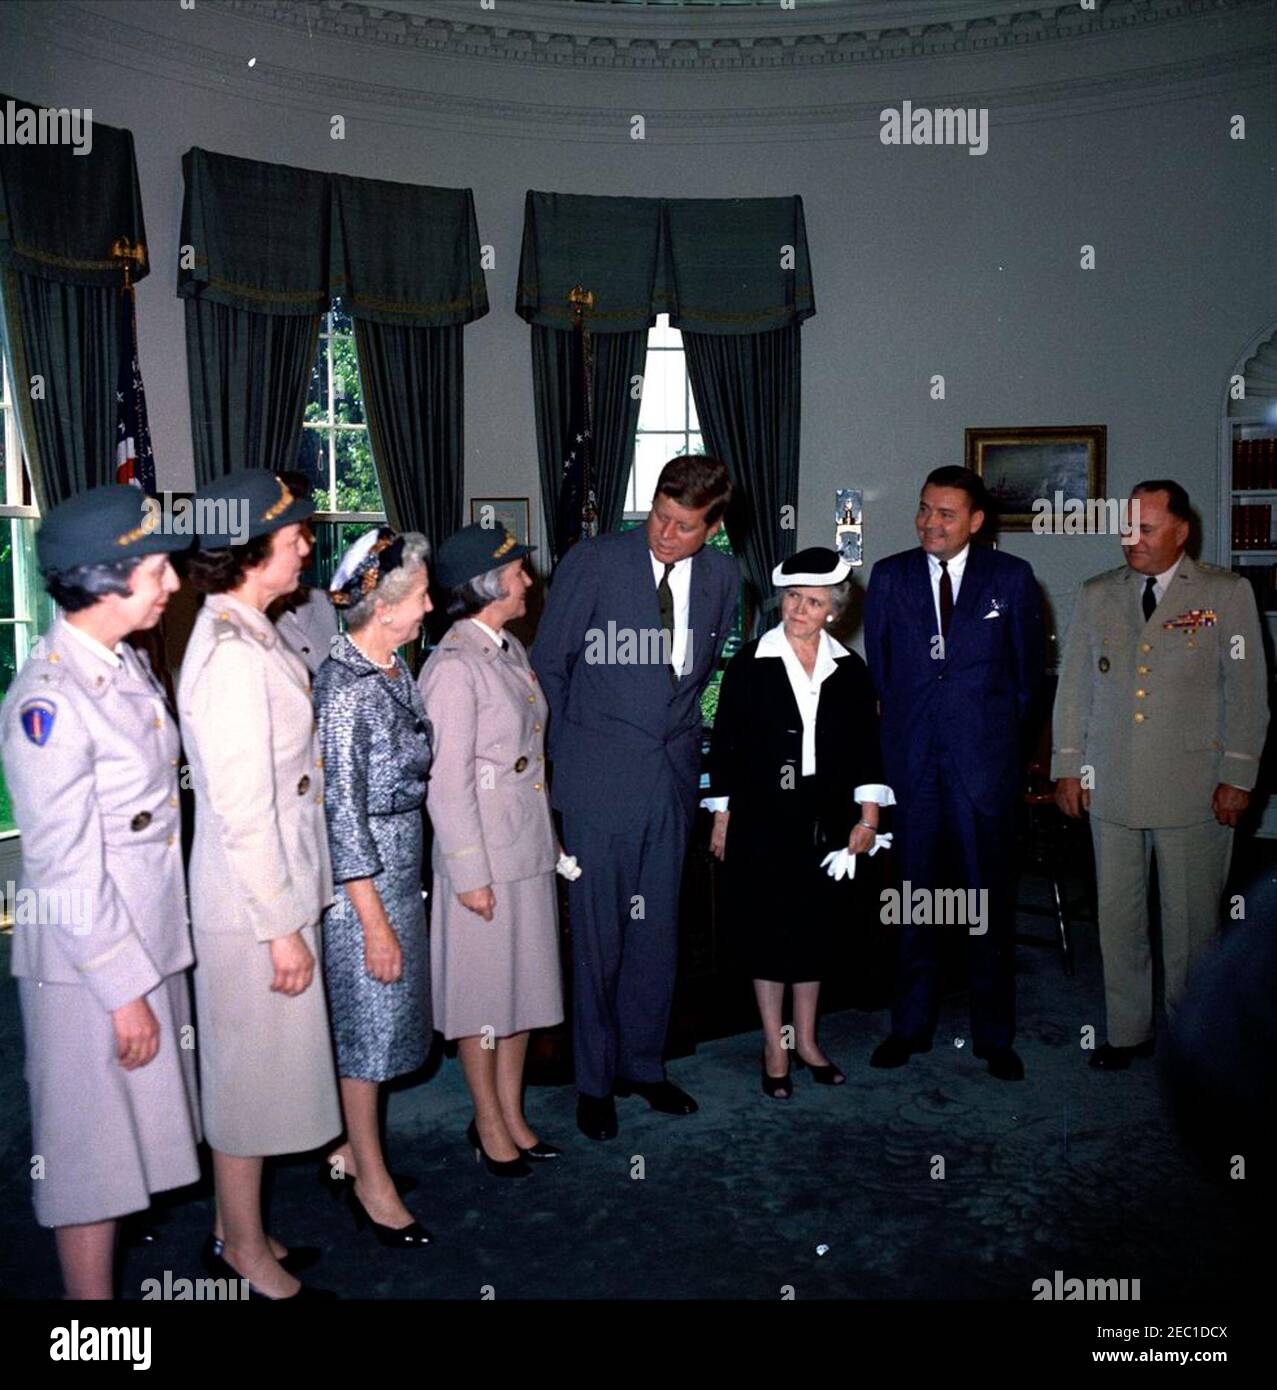 Visit of representatives of the Womenu0027s Army Corps regarding 20th Anniversary, Oval Office, 11:45AM. President John F. Kennedy visits with representatives of the Womenu2019s Army Corps (WAC) regarding the corpsu2019 20th anniversary. Left to right: Director-designate of the WAC, Lieutenant Colonel Emily C. Gorman; former WAC director, Colonel Irene O. Galloway; former WAC director, Colonel Westray Battle Leslie; Director of the WAC, Colonel Mary Louise Milligan Rasmuson; President Kennedy; former WAC director, Colonel Mary Hallaren; Secretary of the Army, Elvis J. Stahr, Jr.; Chief of S Stock Photo